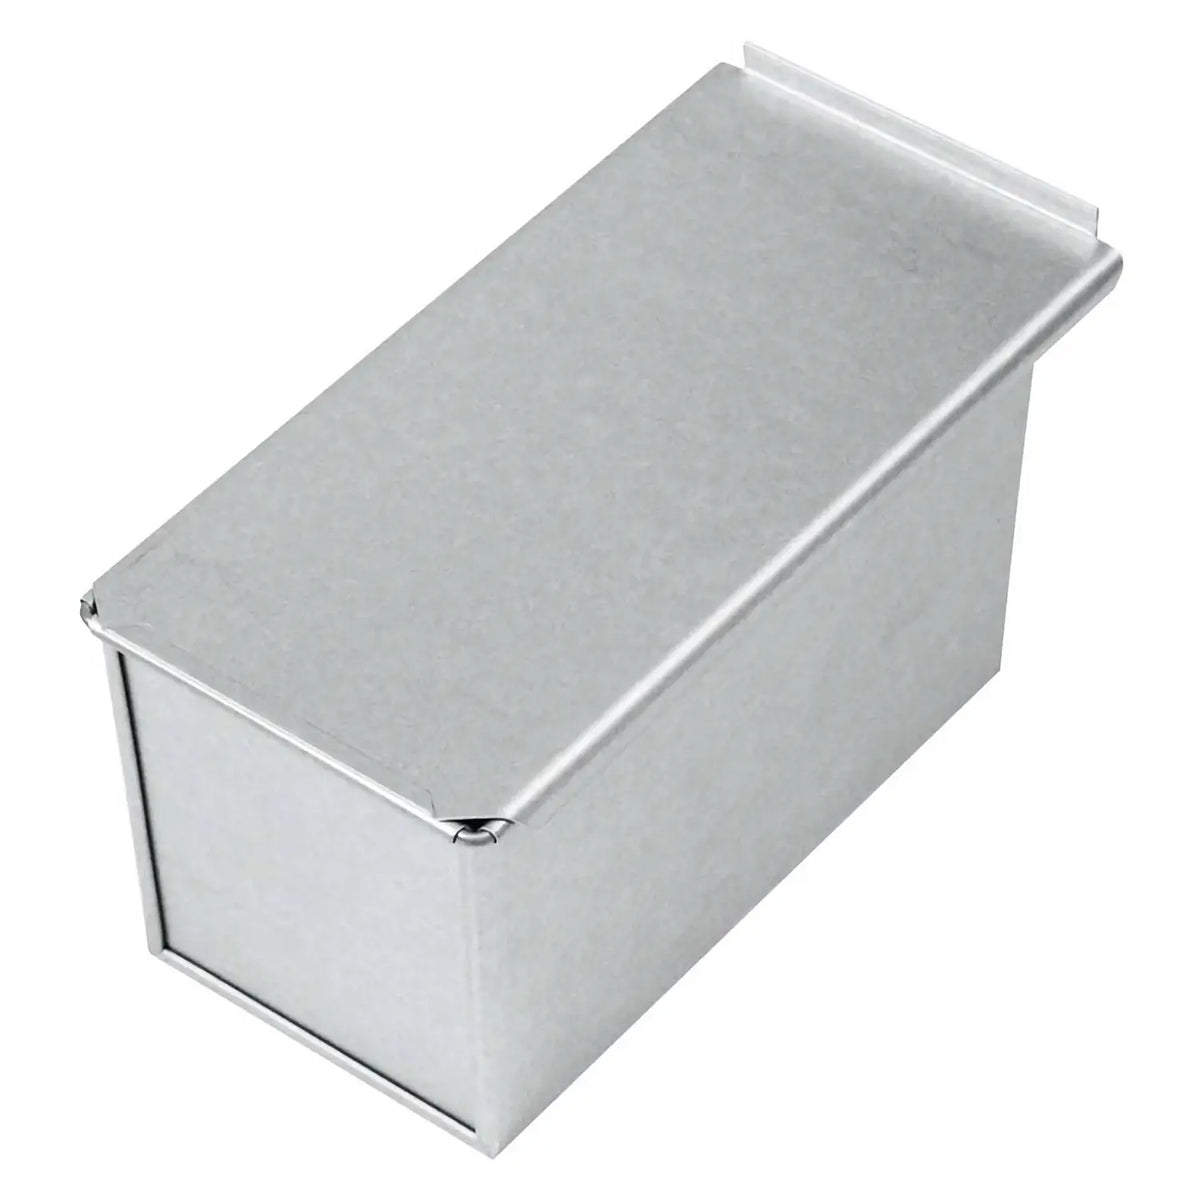 EBM Altaite Loaf Pan with Lid